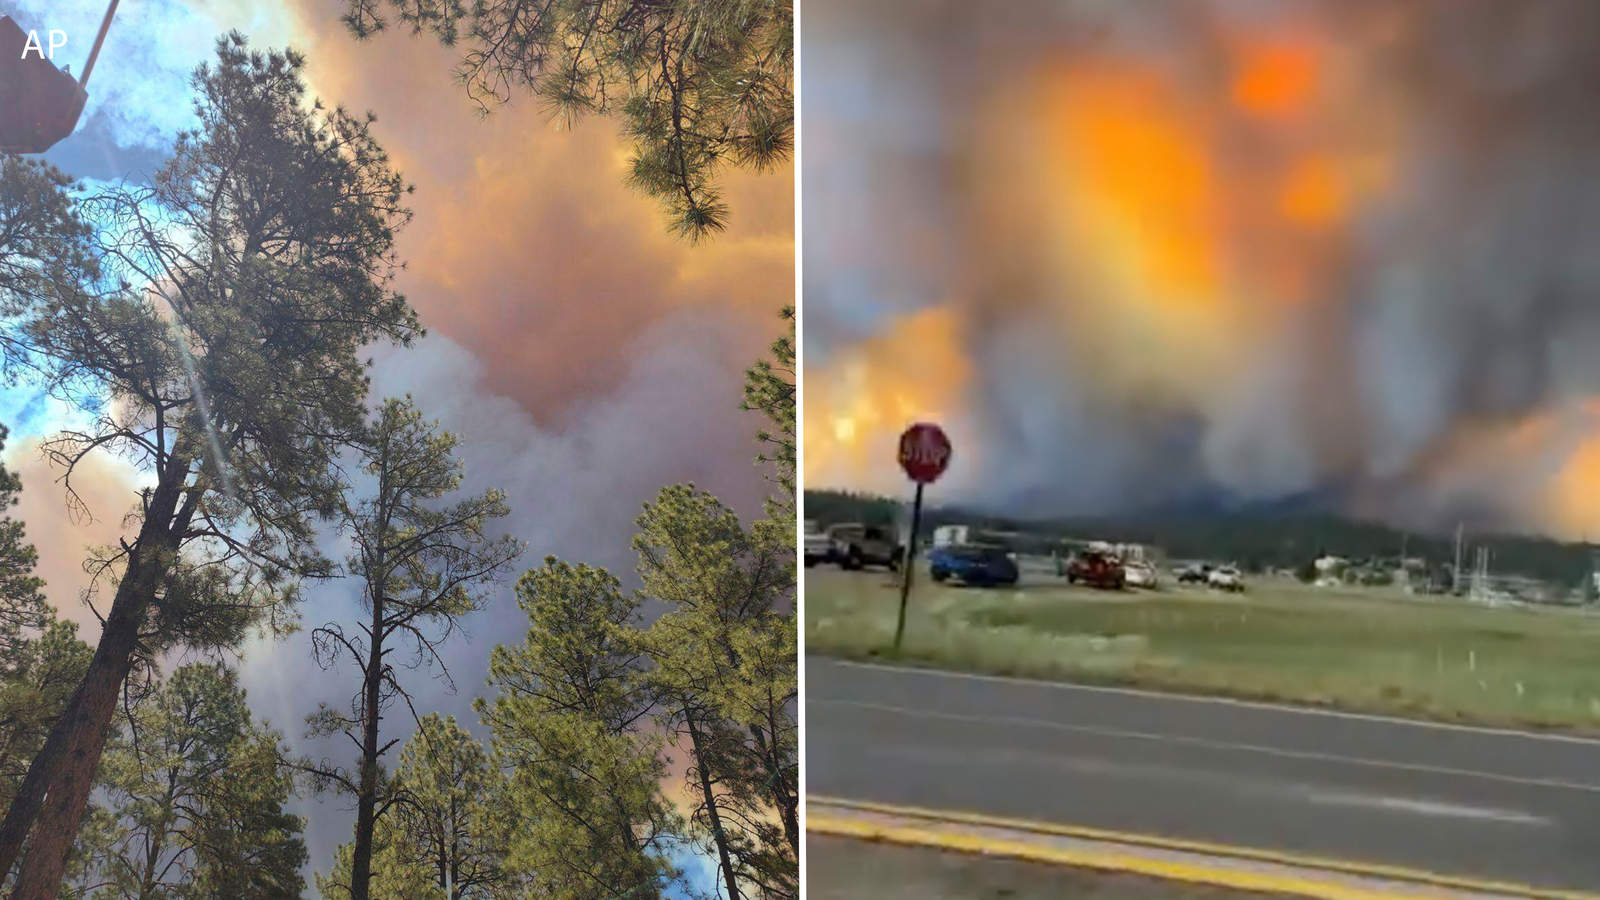 New Mexico governor declares emergency as thousands flee wildfires that have damaged 500 structures in mountain village of Ruidoso [Video]